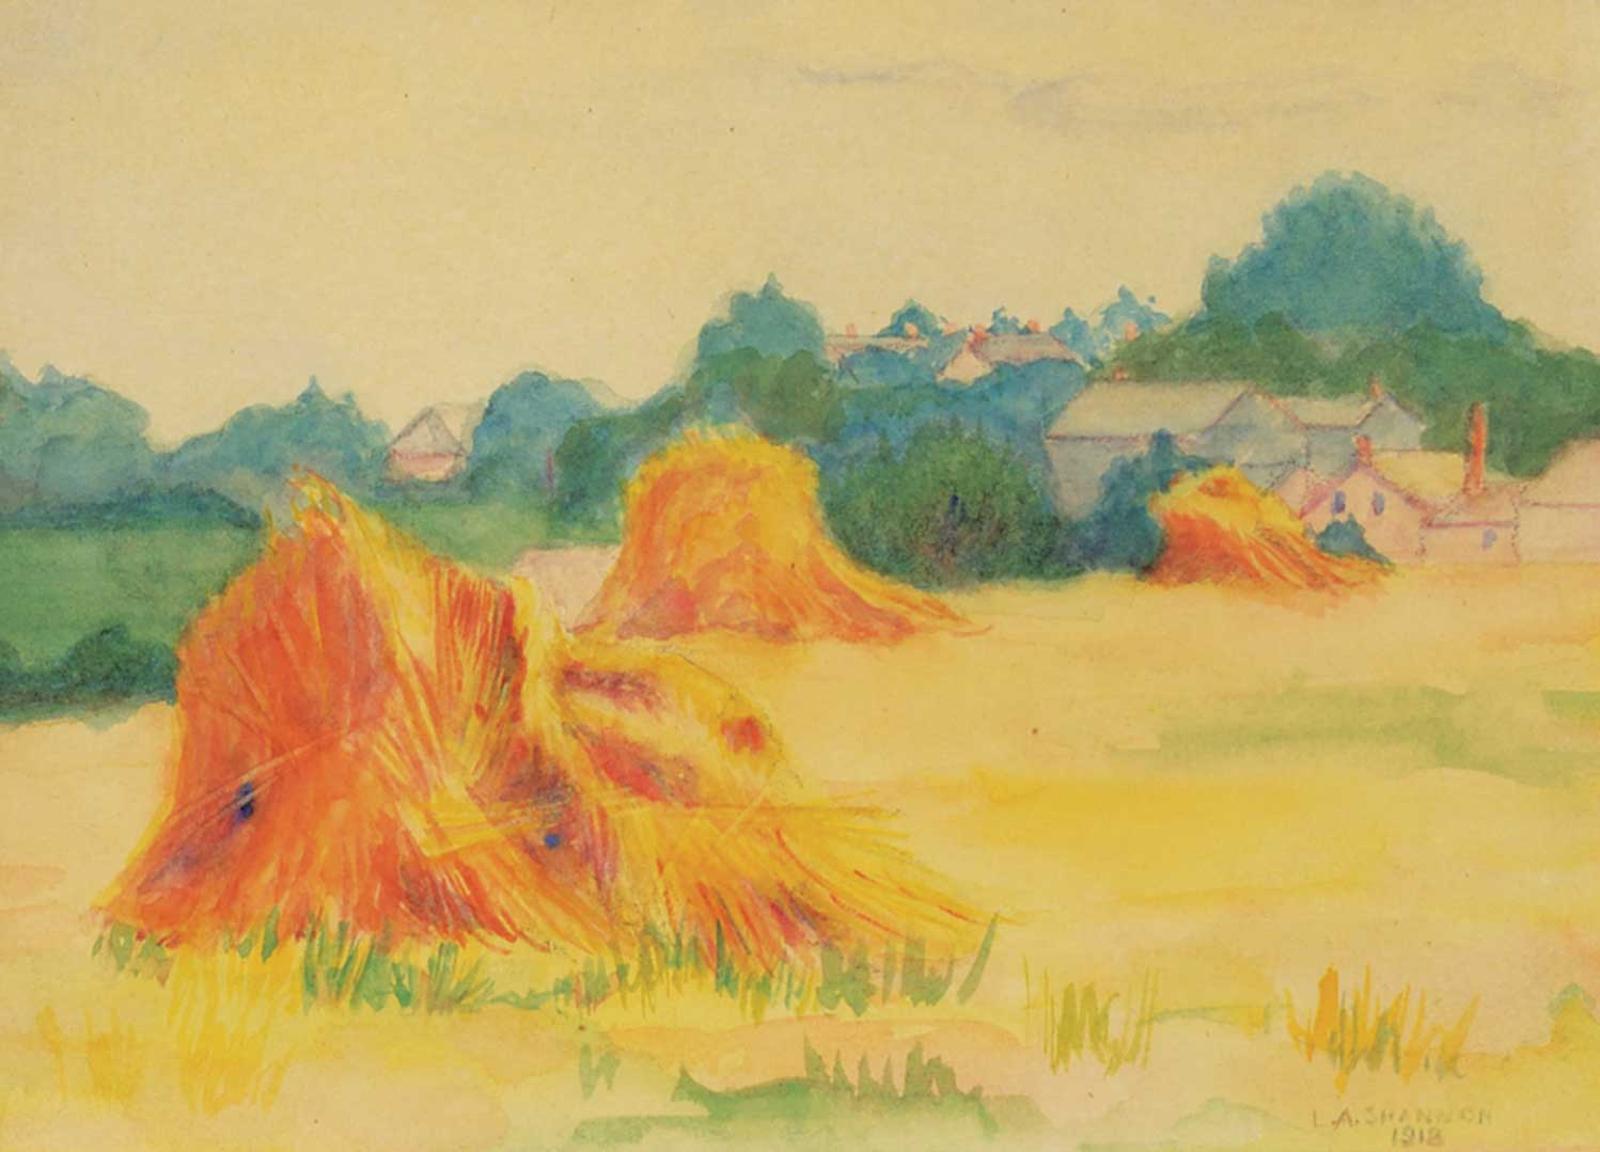 L.A. Shannon - Untitled - Stooks by the Village